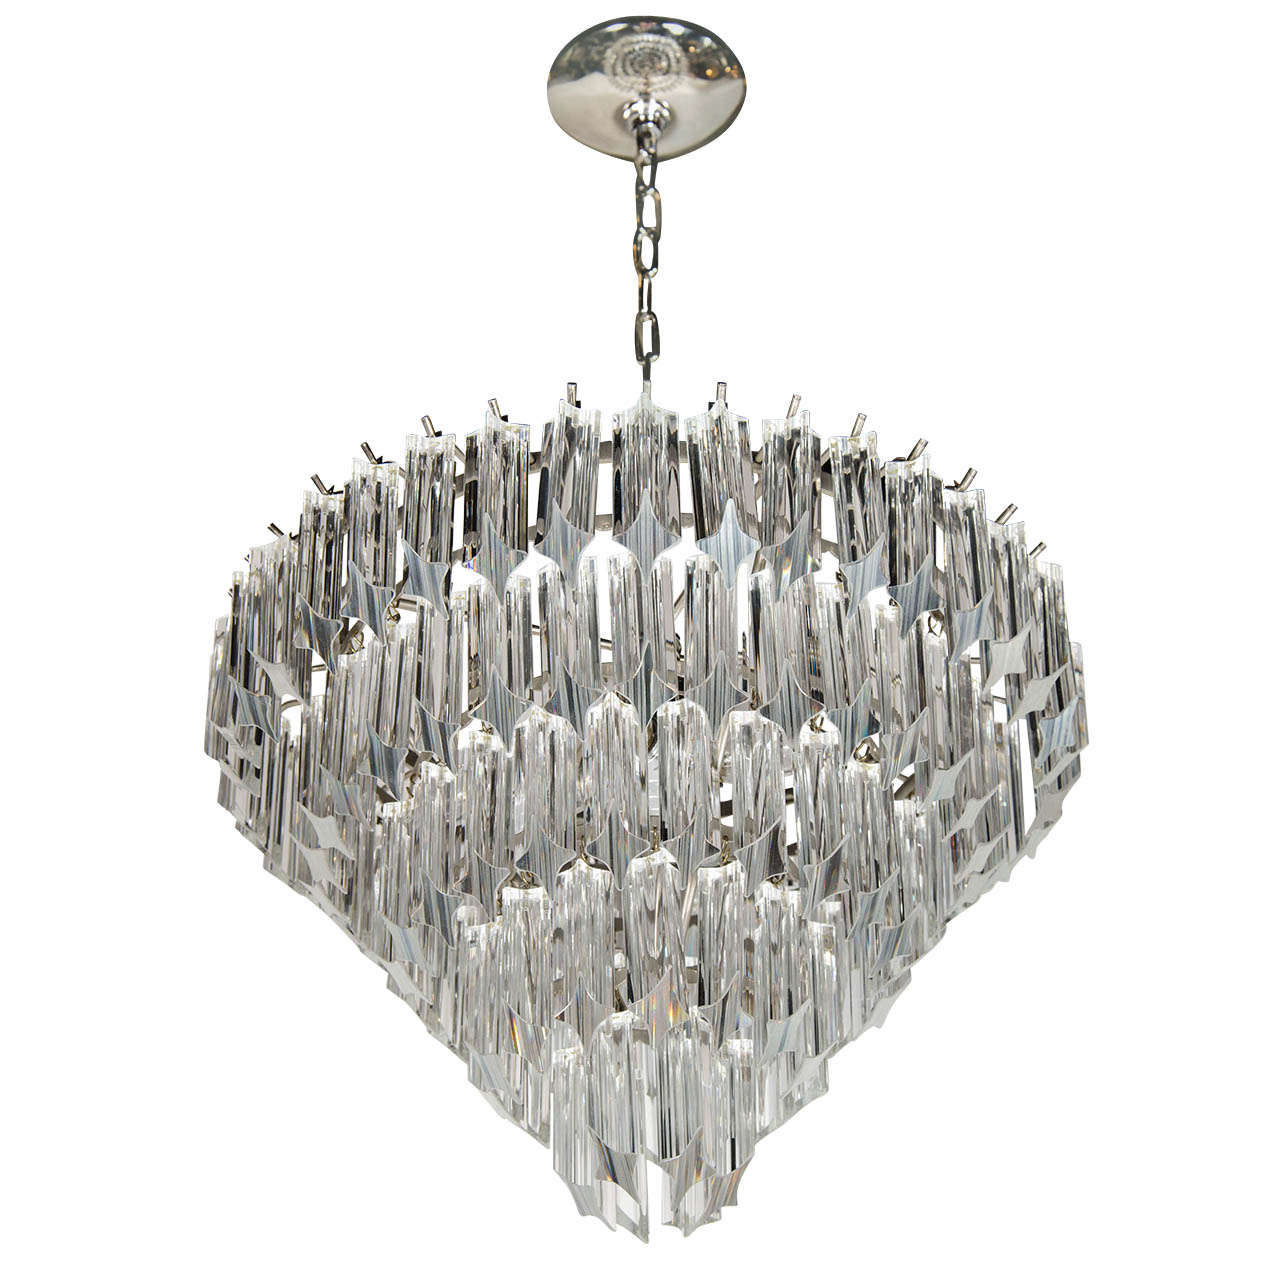 Exceptional Mid-Century Murano Glass 5 Tier Camer Chandelier